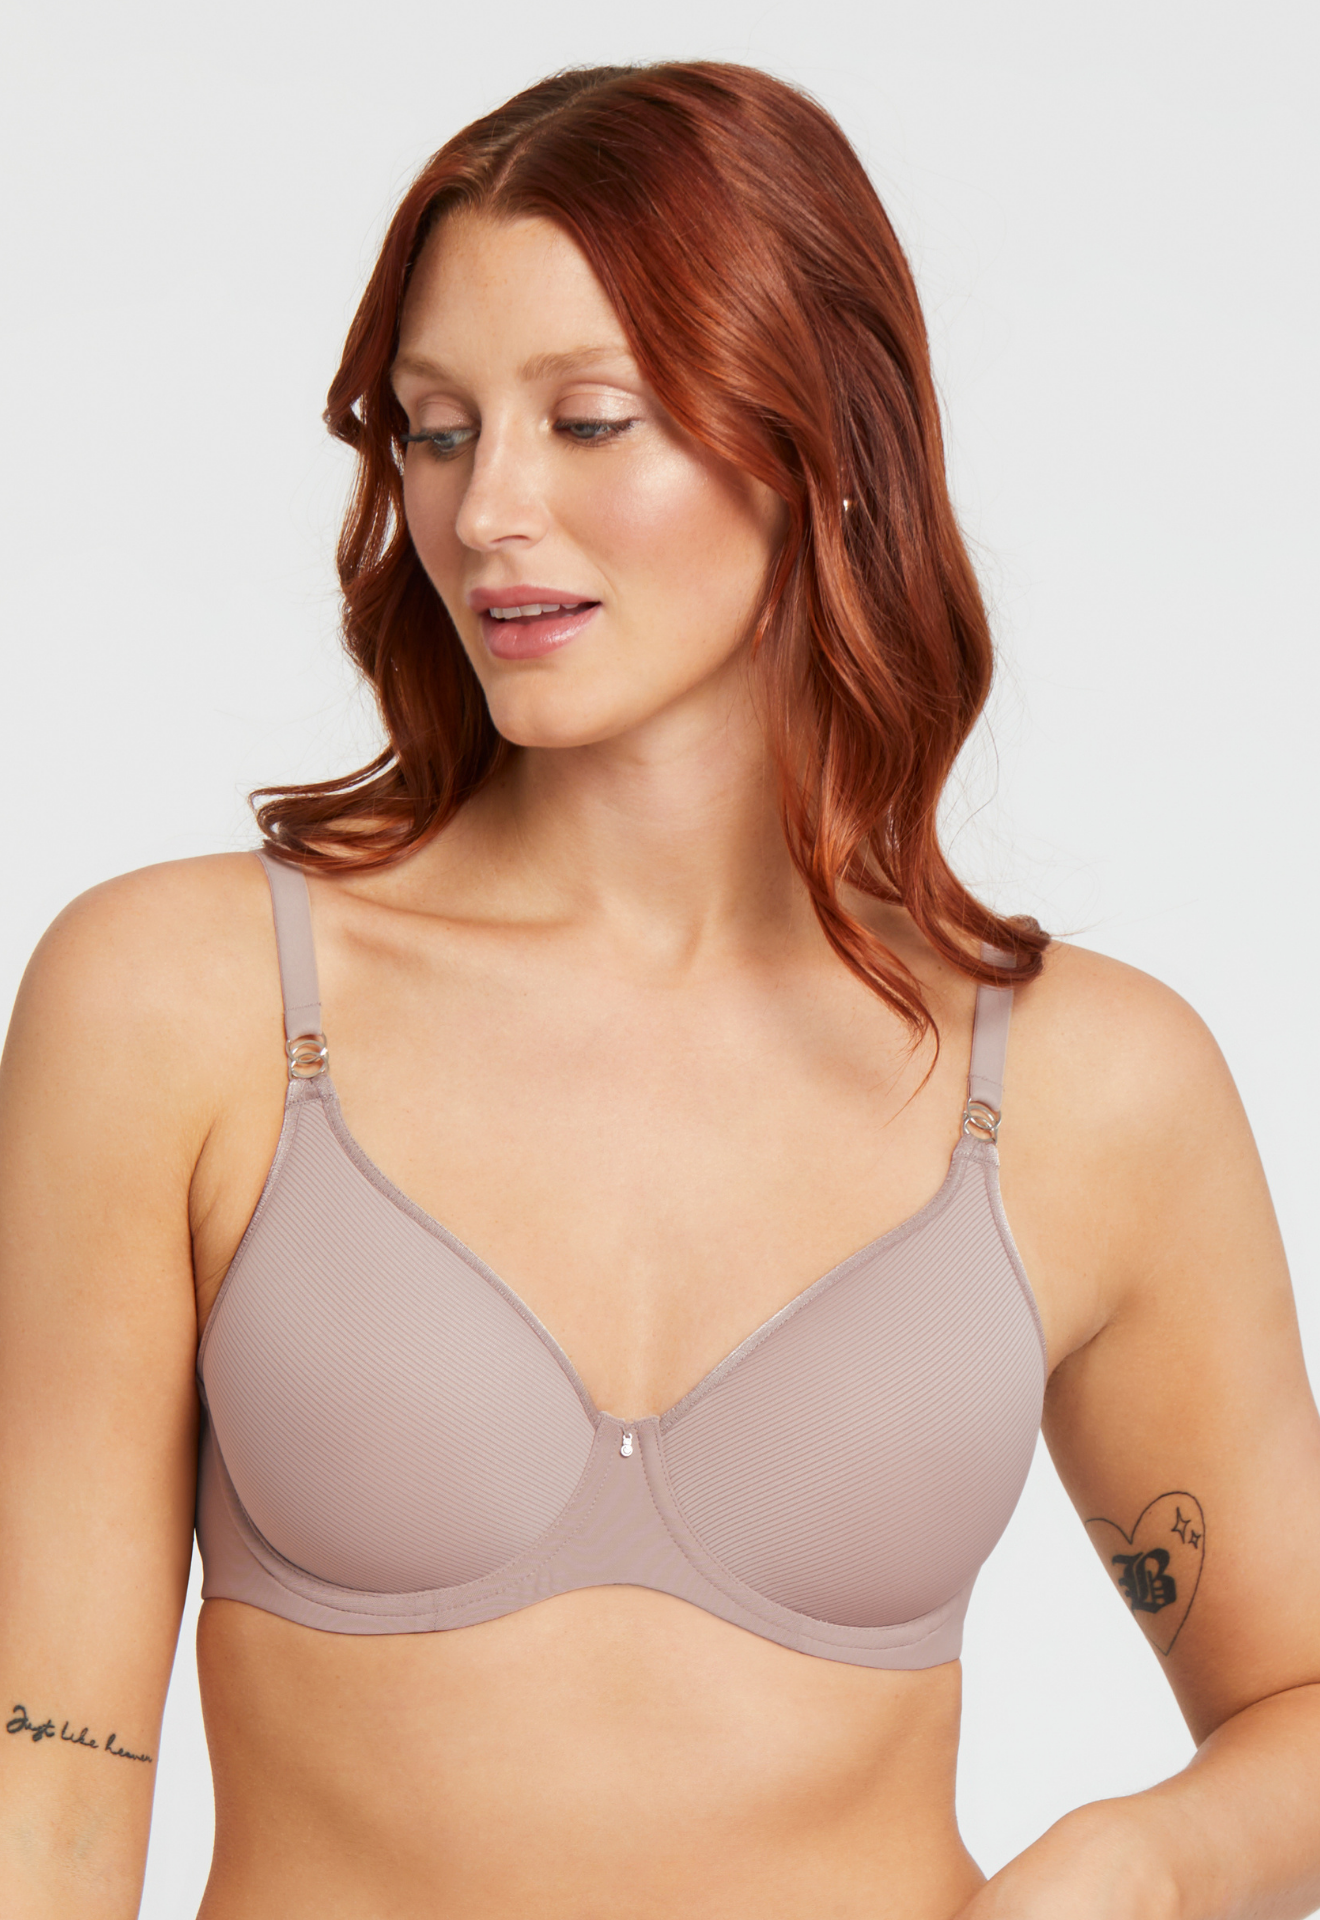 Sublime Spacer T-Shirt Bra - Moonshell worn by model front view